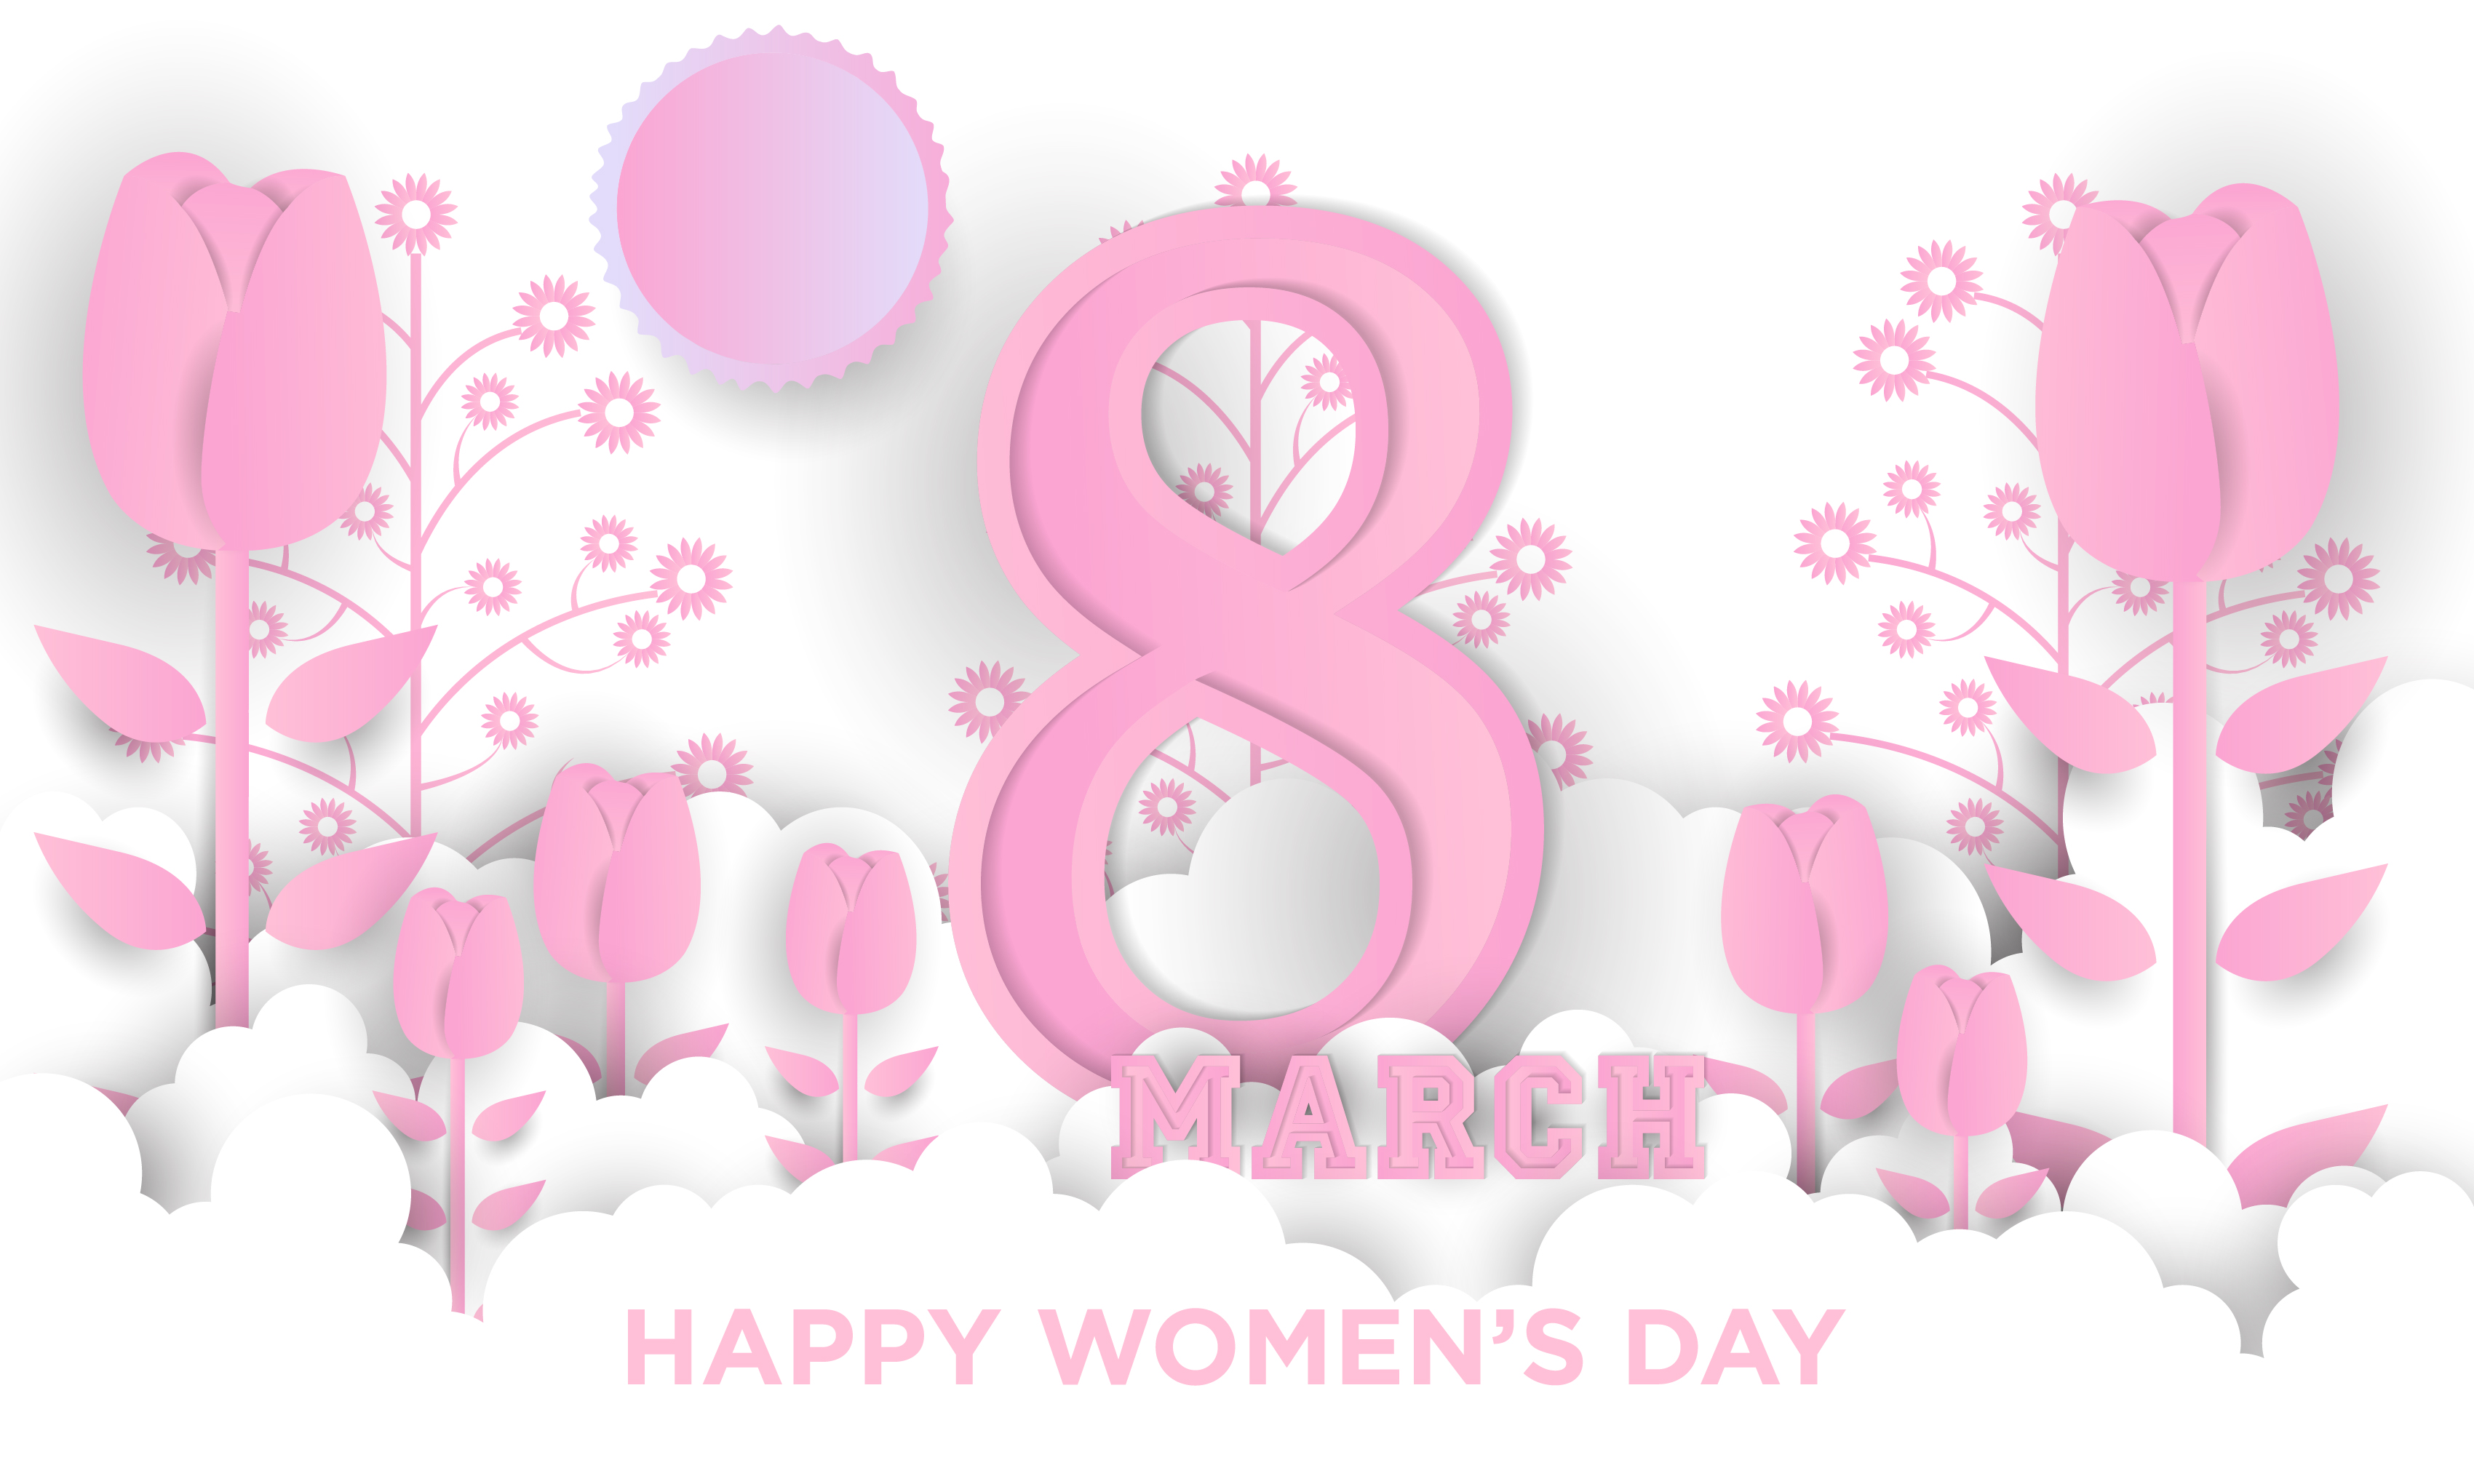 holiday, women's day, flower, happy women's day